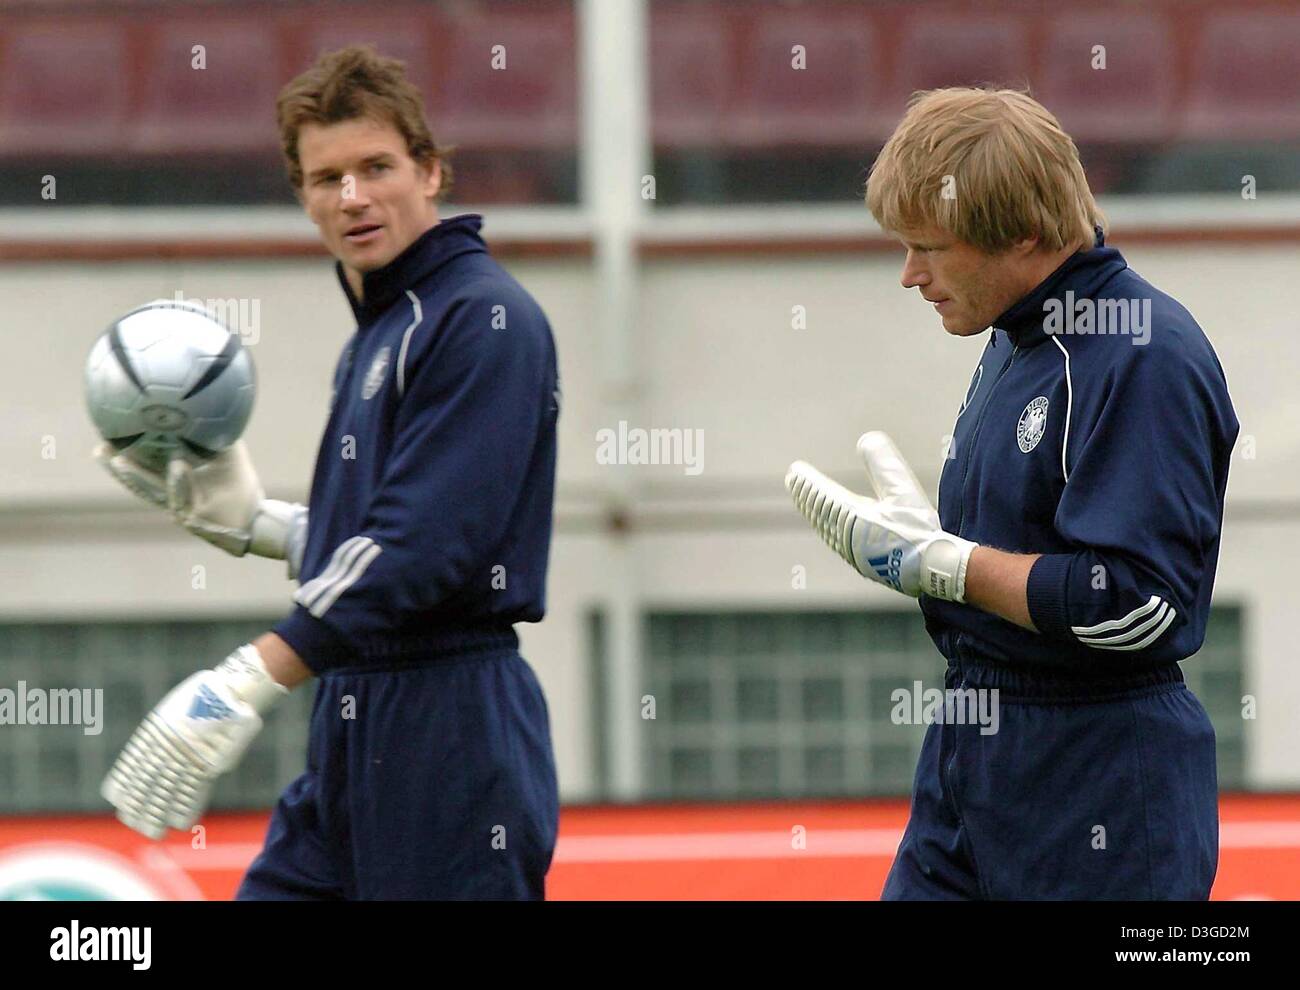 (dpa files) - German national team goalkeepers Jens Lehmann (l) and Oliver Kahn walk across the pitch during a training session in Bucharest, Romania, 27 April 2004. The fight for the top goalkeeping spot on the German national team has been revived before Germany's scheduled international friendly match against Iran in Tehran on 9 October 2004. Kahn and Lehmann have been fighting  Stock Photo